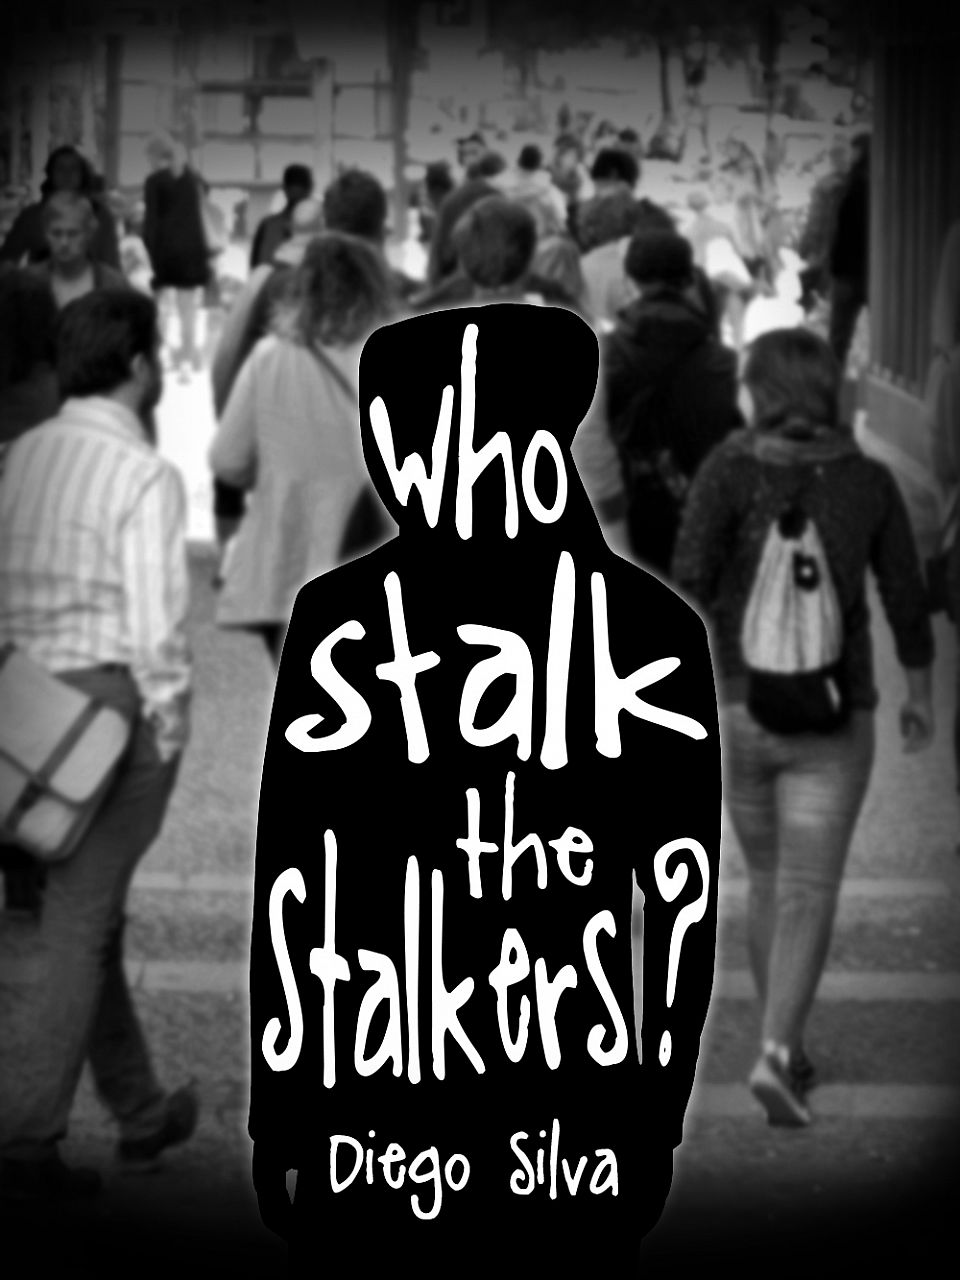 Who stalk the stalkers?